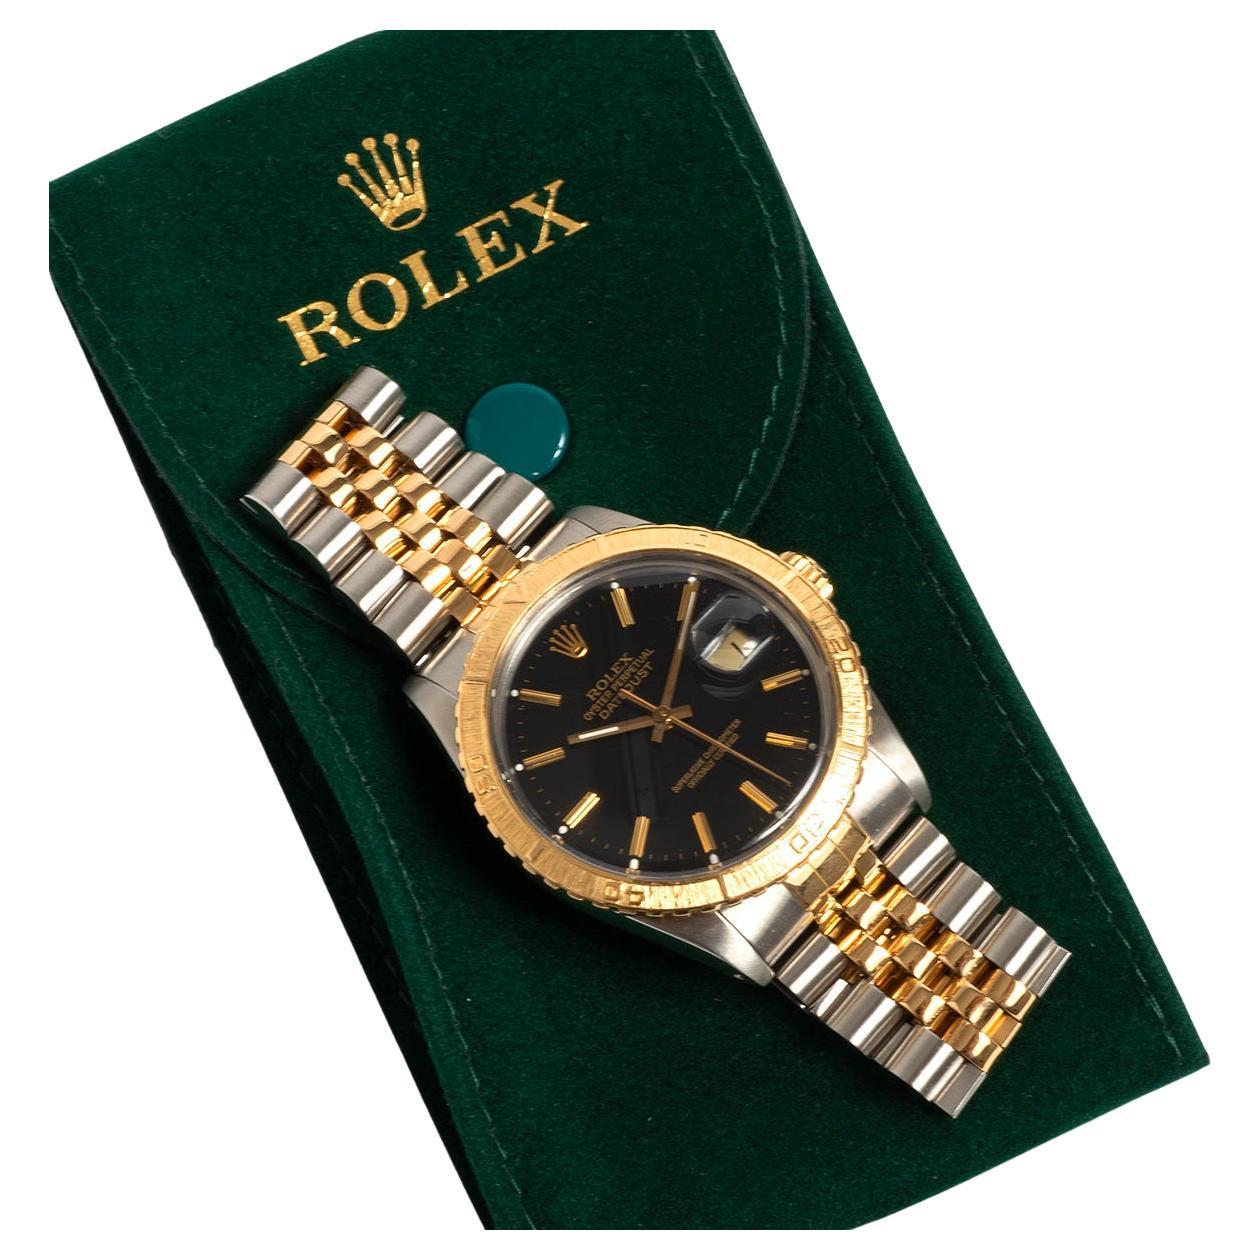 What is a Rolex Ghost dial?